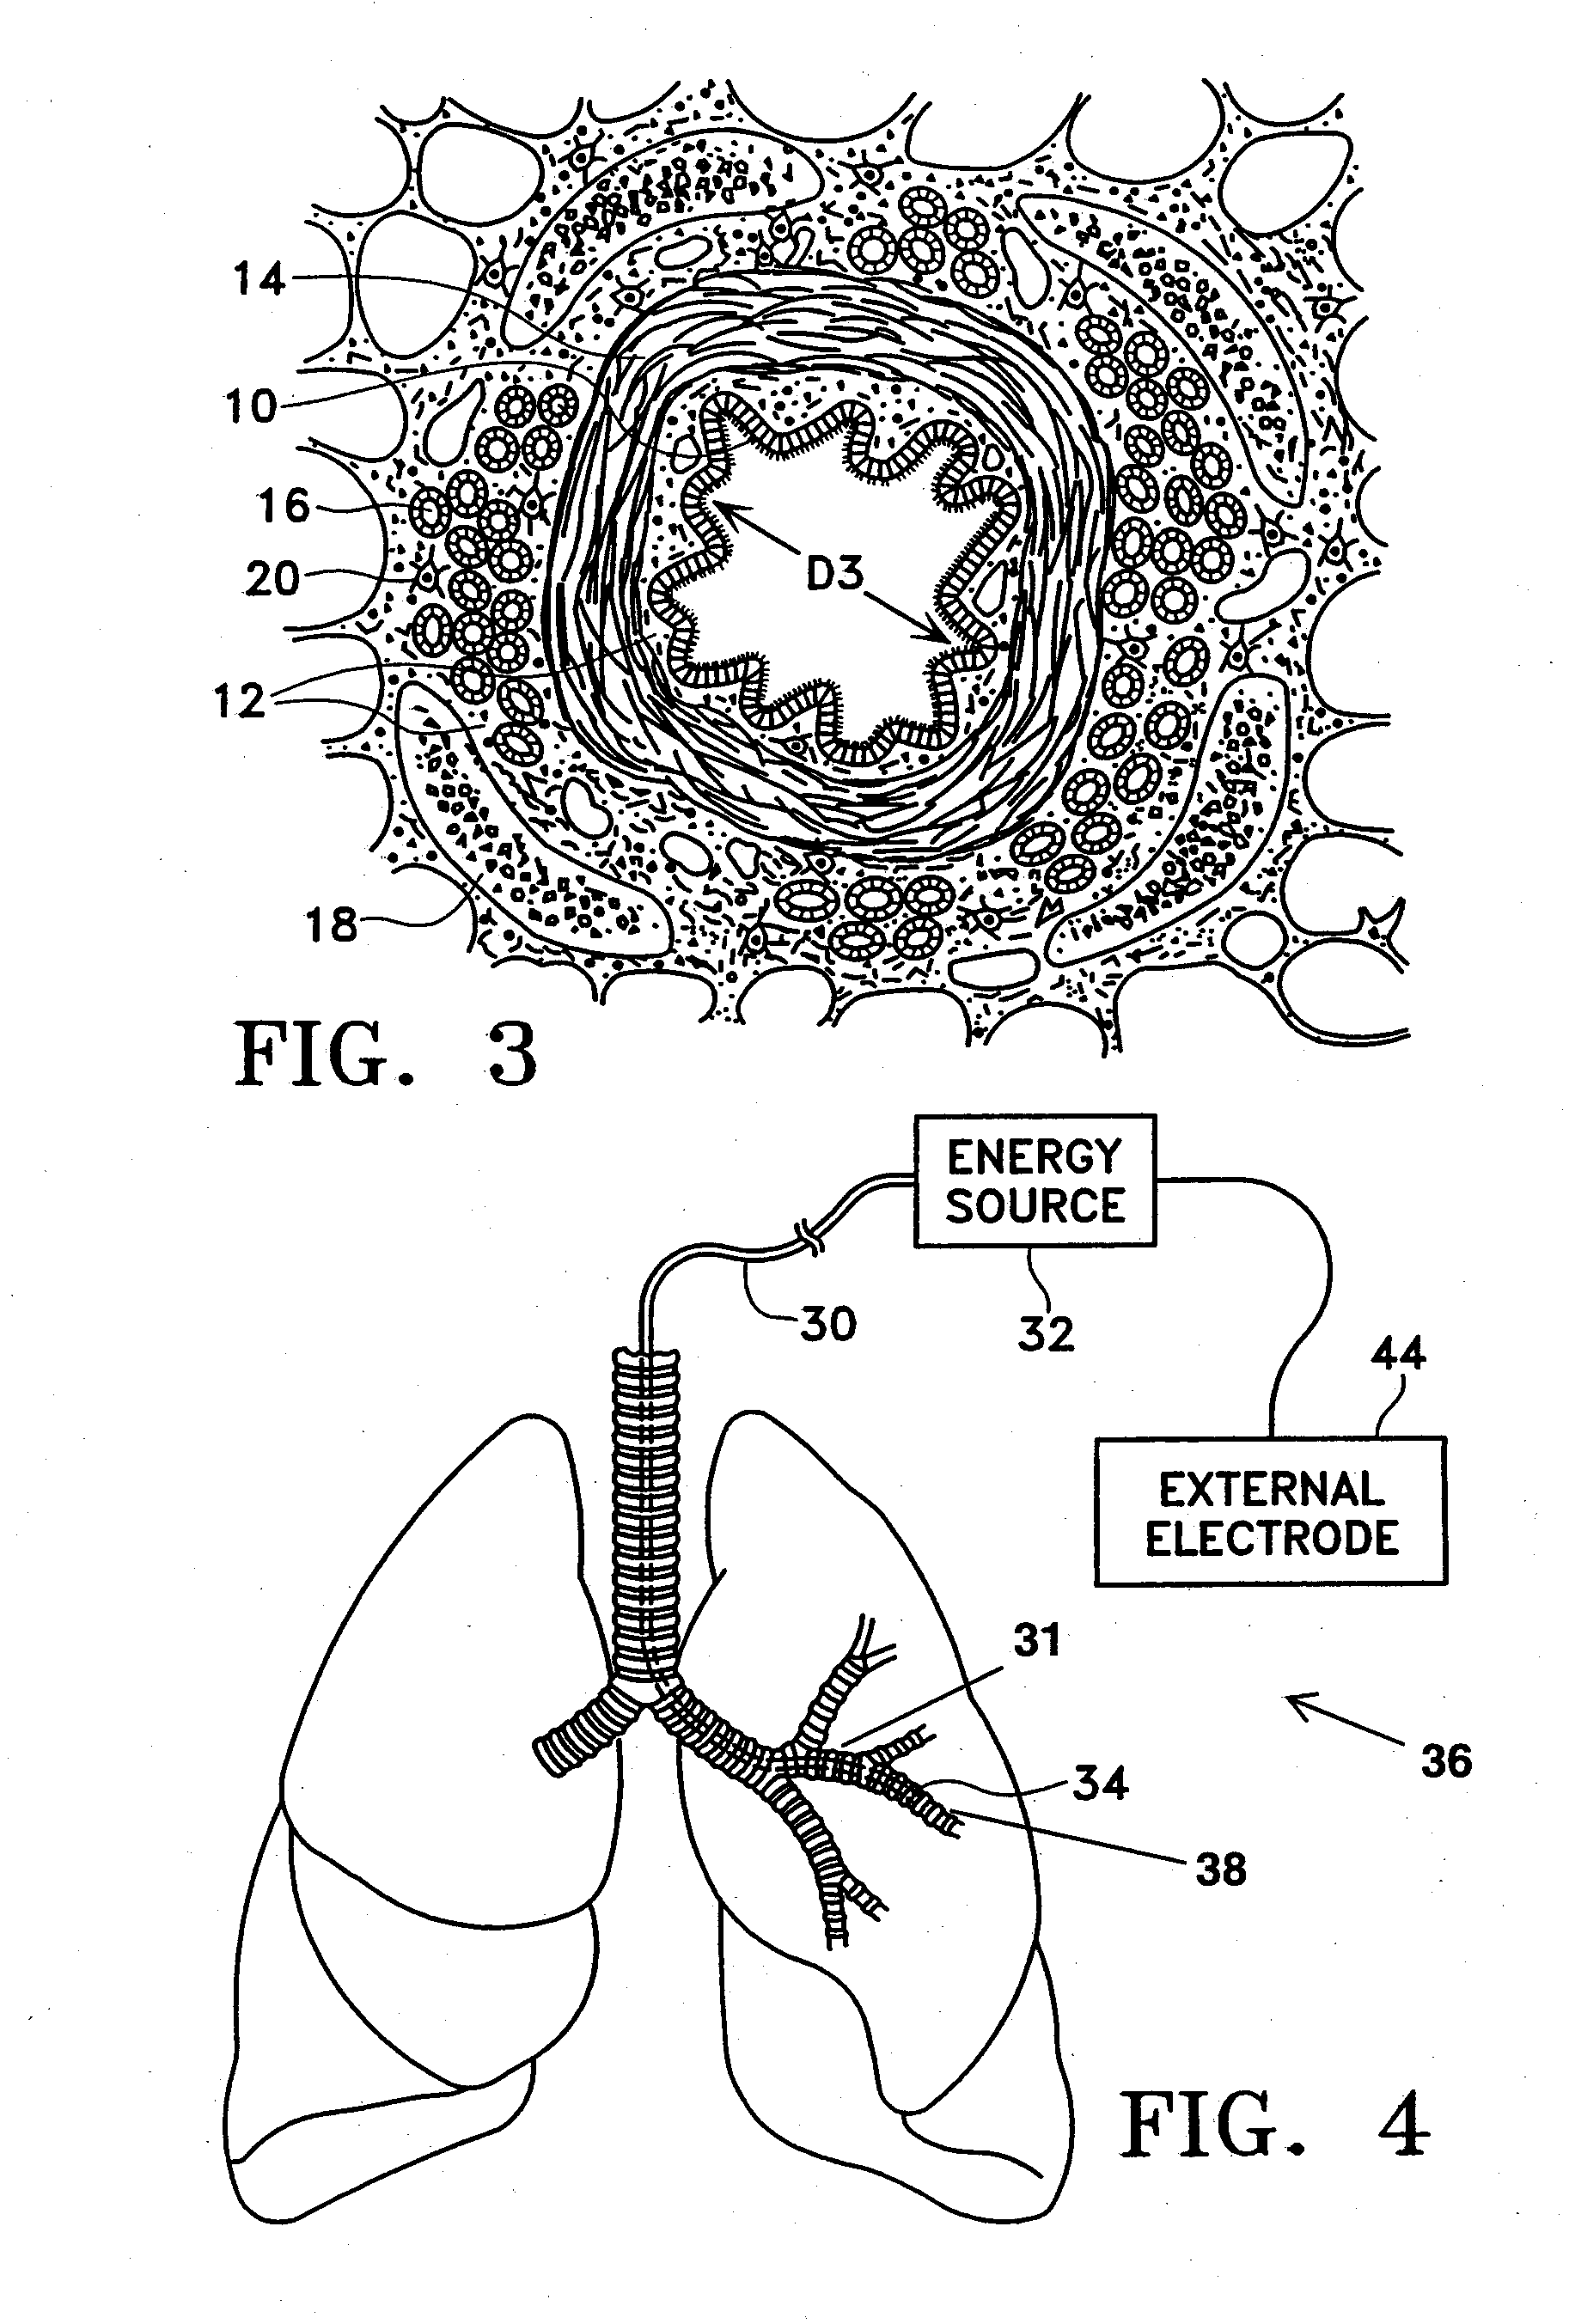 Method for treating an asthma attack